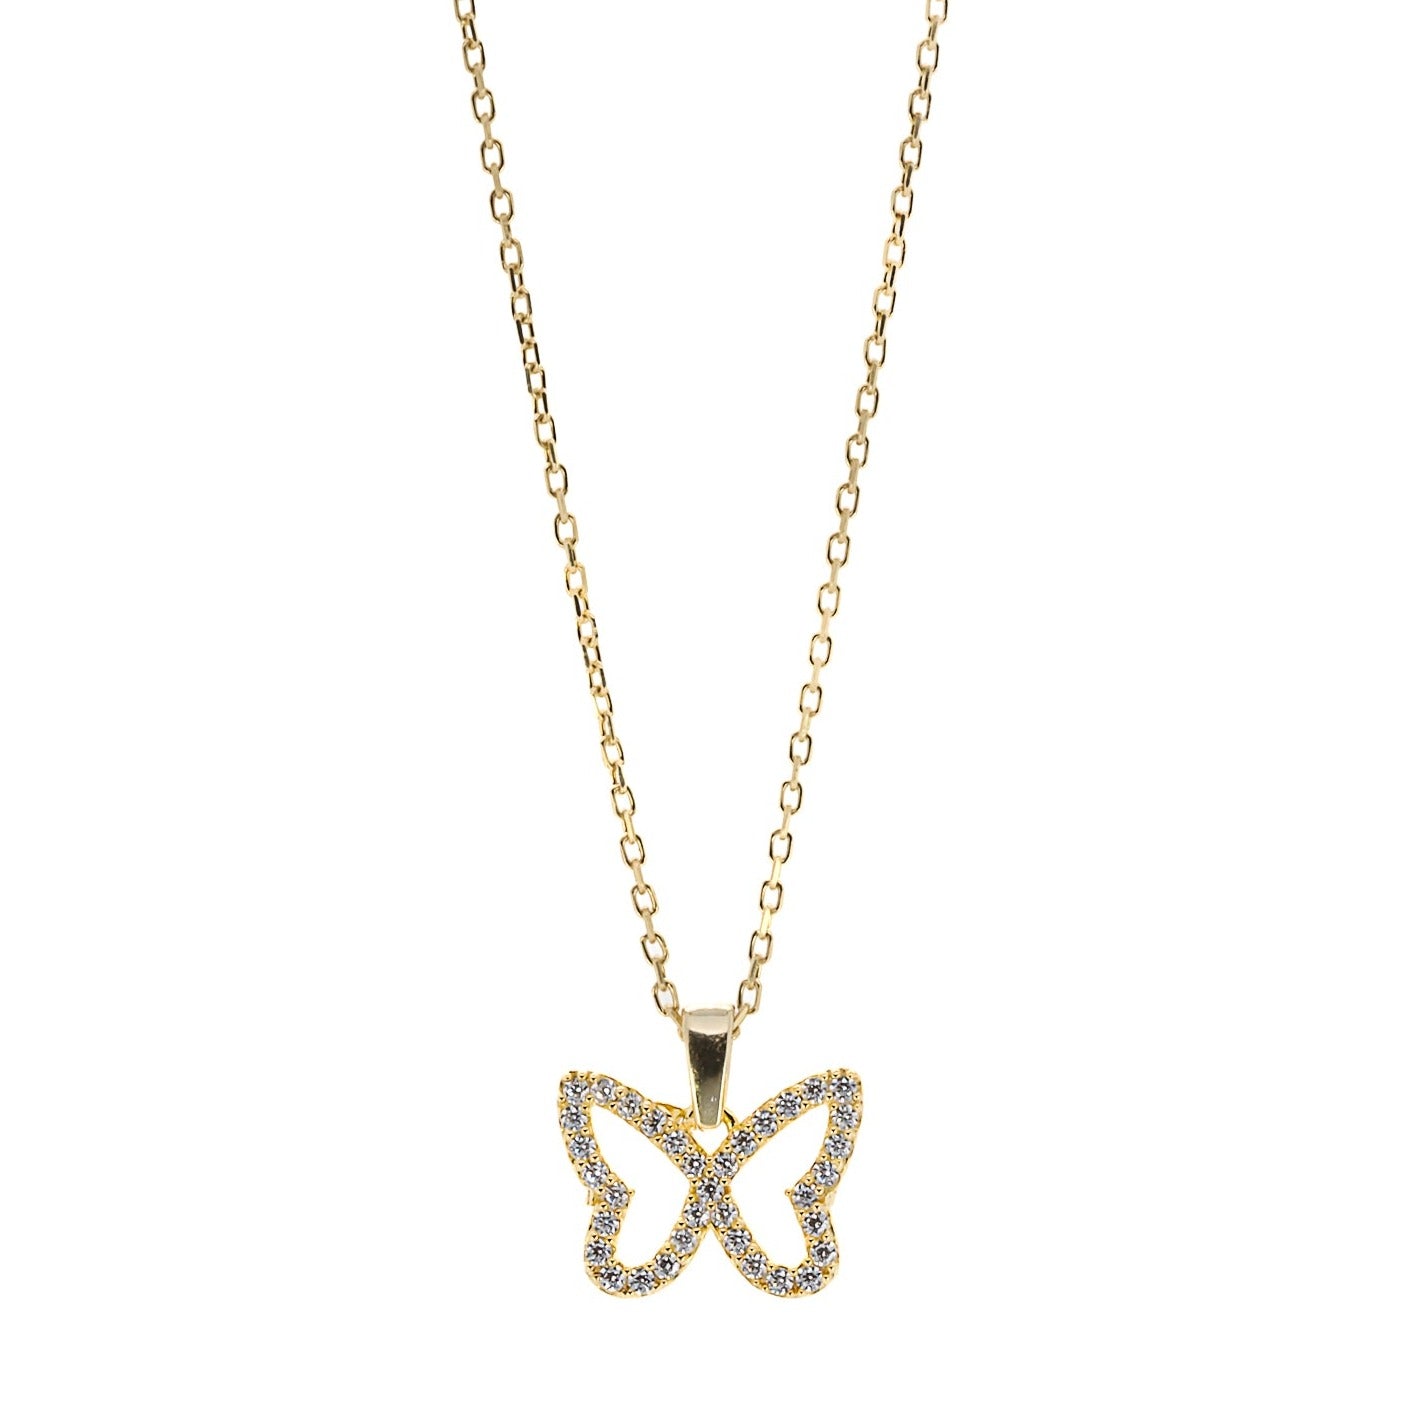 The Gold Sparkly Butterfly Necklace, a symbol of transformation and beauty.